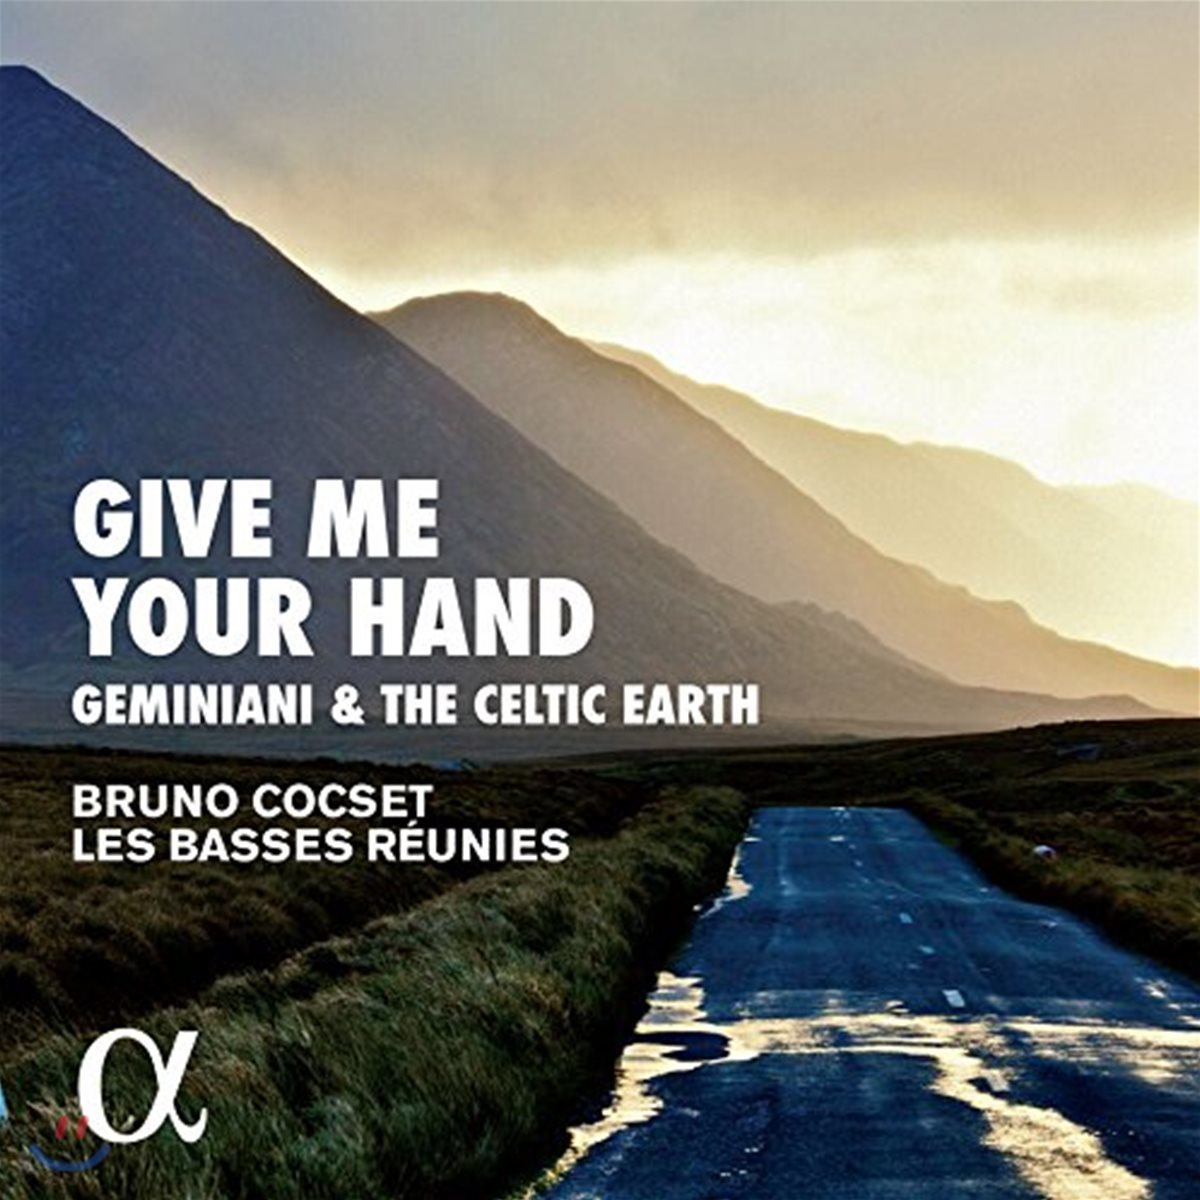 Bruno Cocset / Les Basses Reunies 제미니아니와 켈틱 음악 - 브루노 콕세, 레 바스 레위니 (Give Me Your Hand - Geminiani & The Celtic Earth)